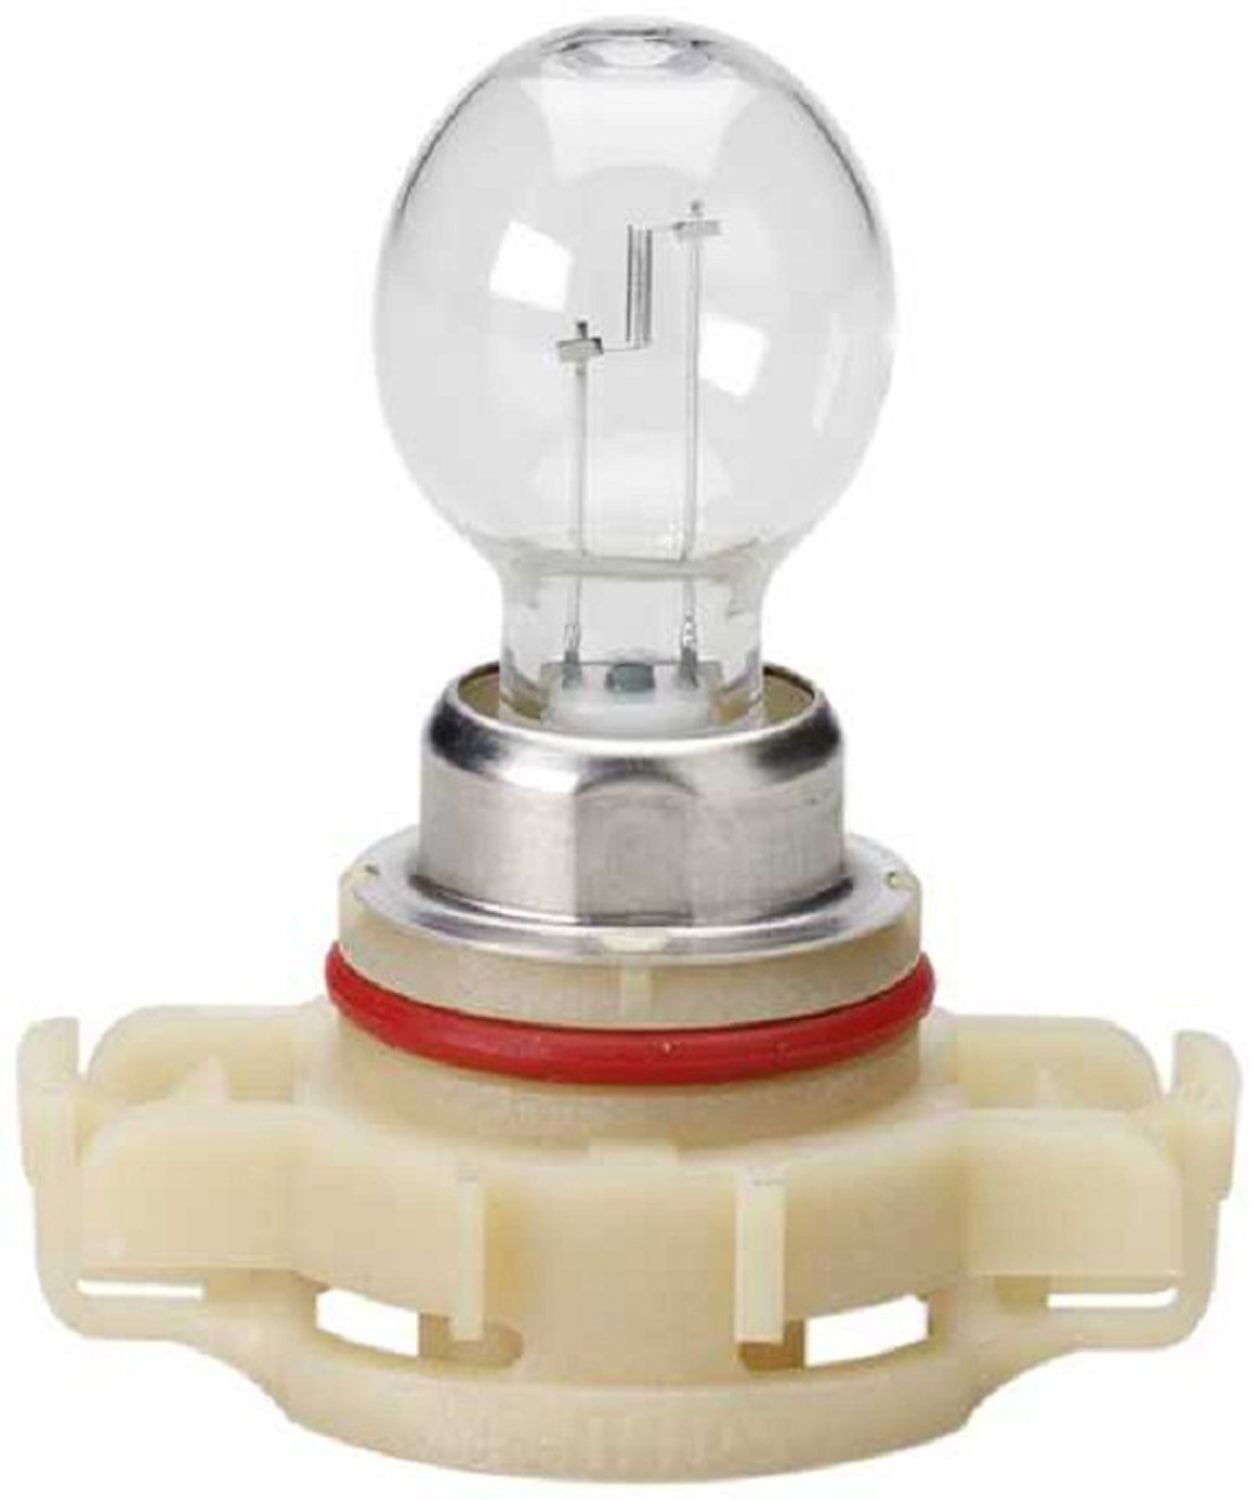 REPLACEMENT BULB FOR ECE S212V3535 35W 12V 